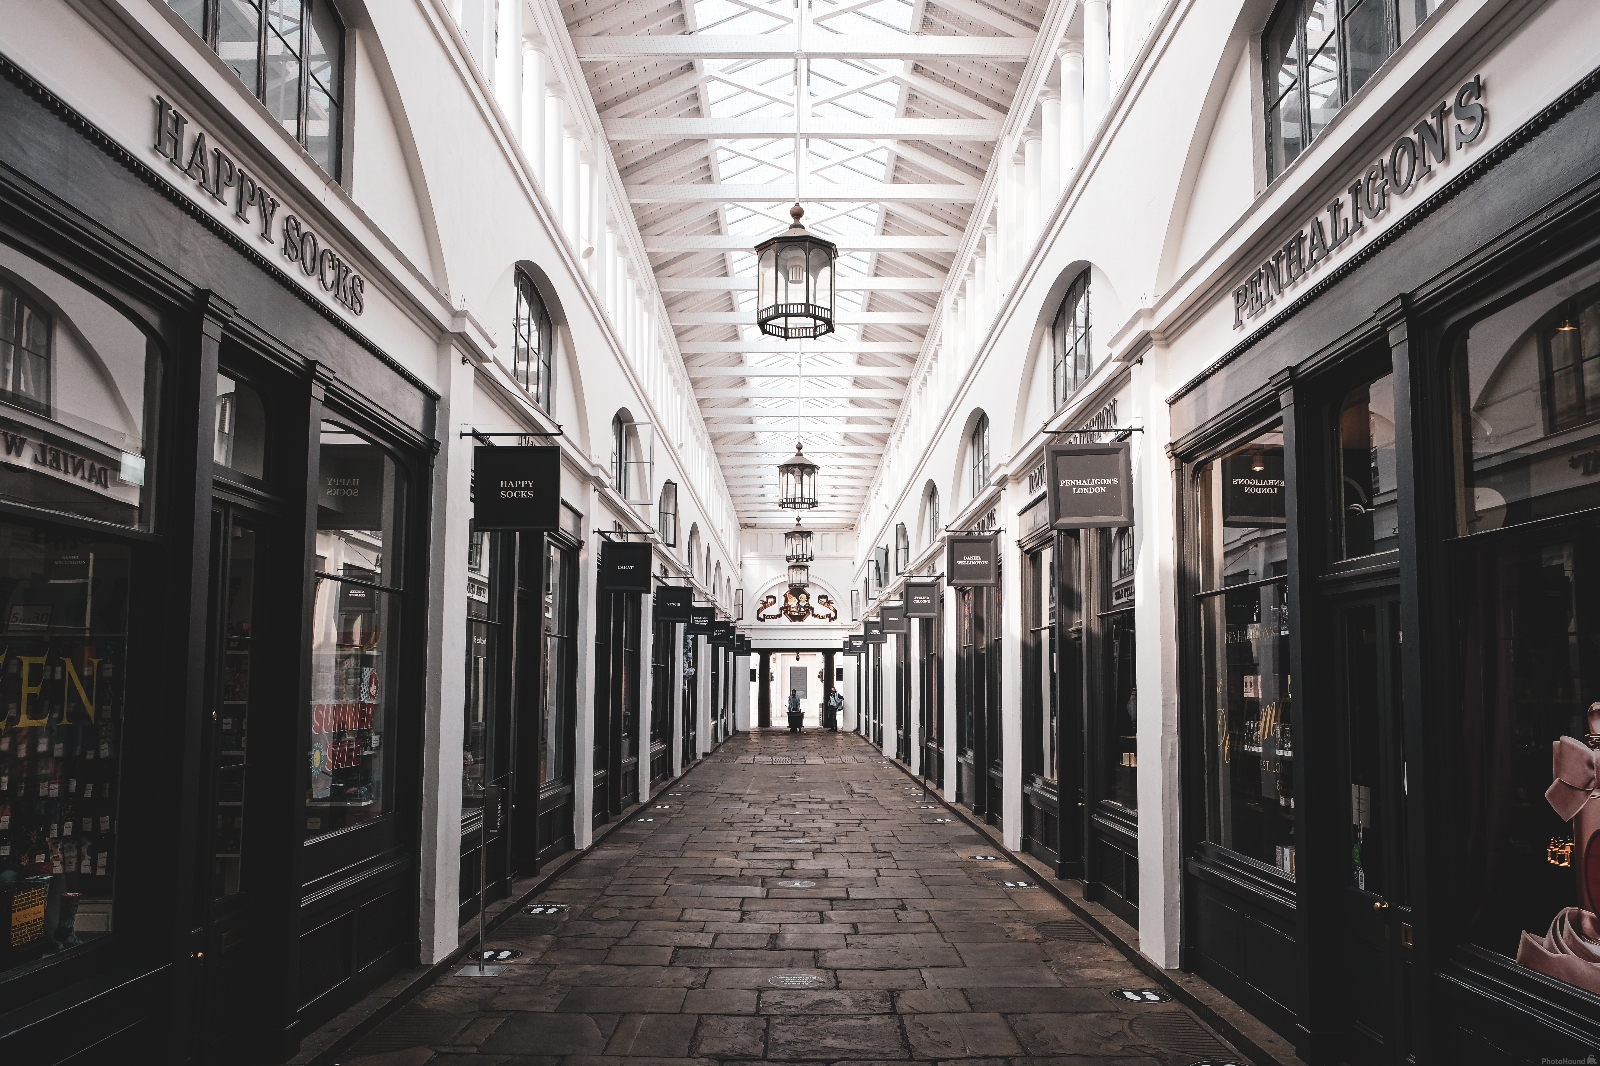 Image of Covent Garden by Jonny Brown